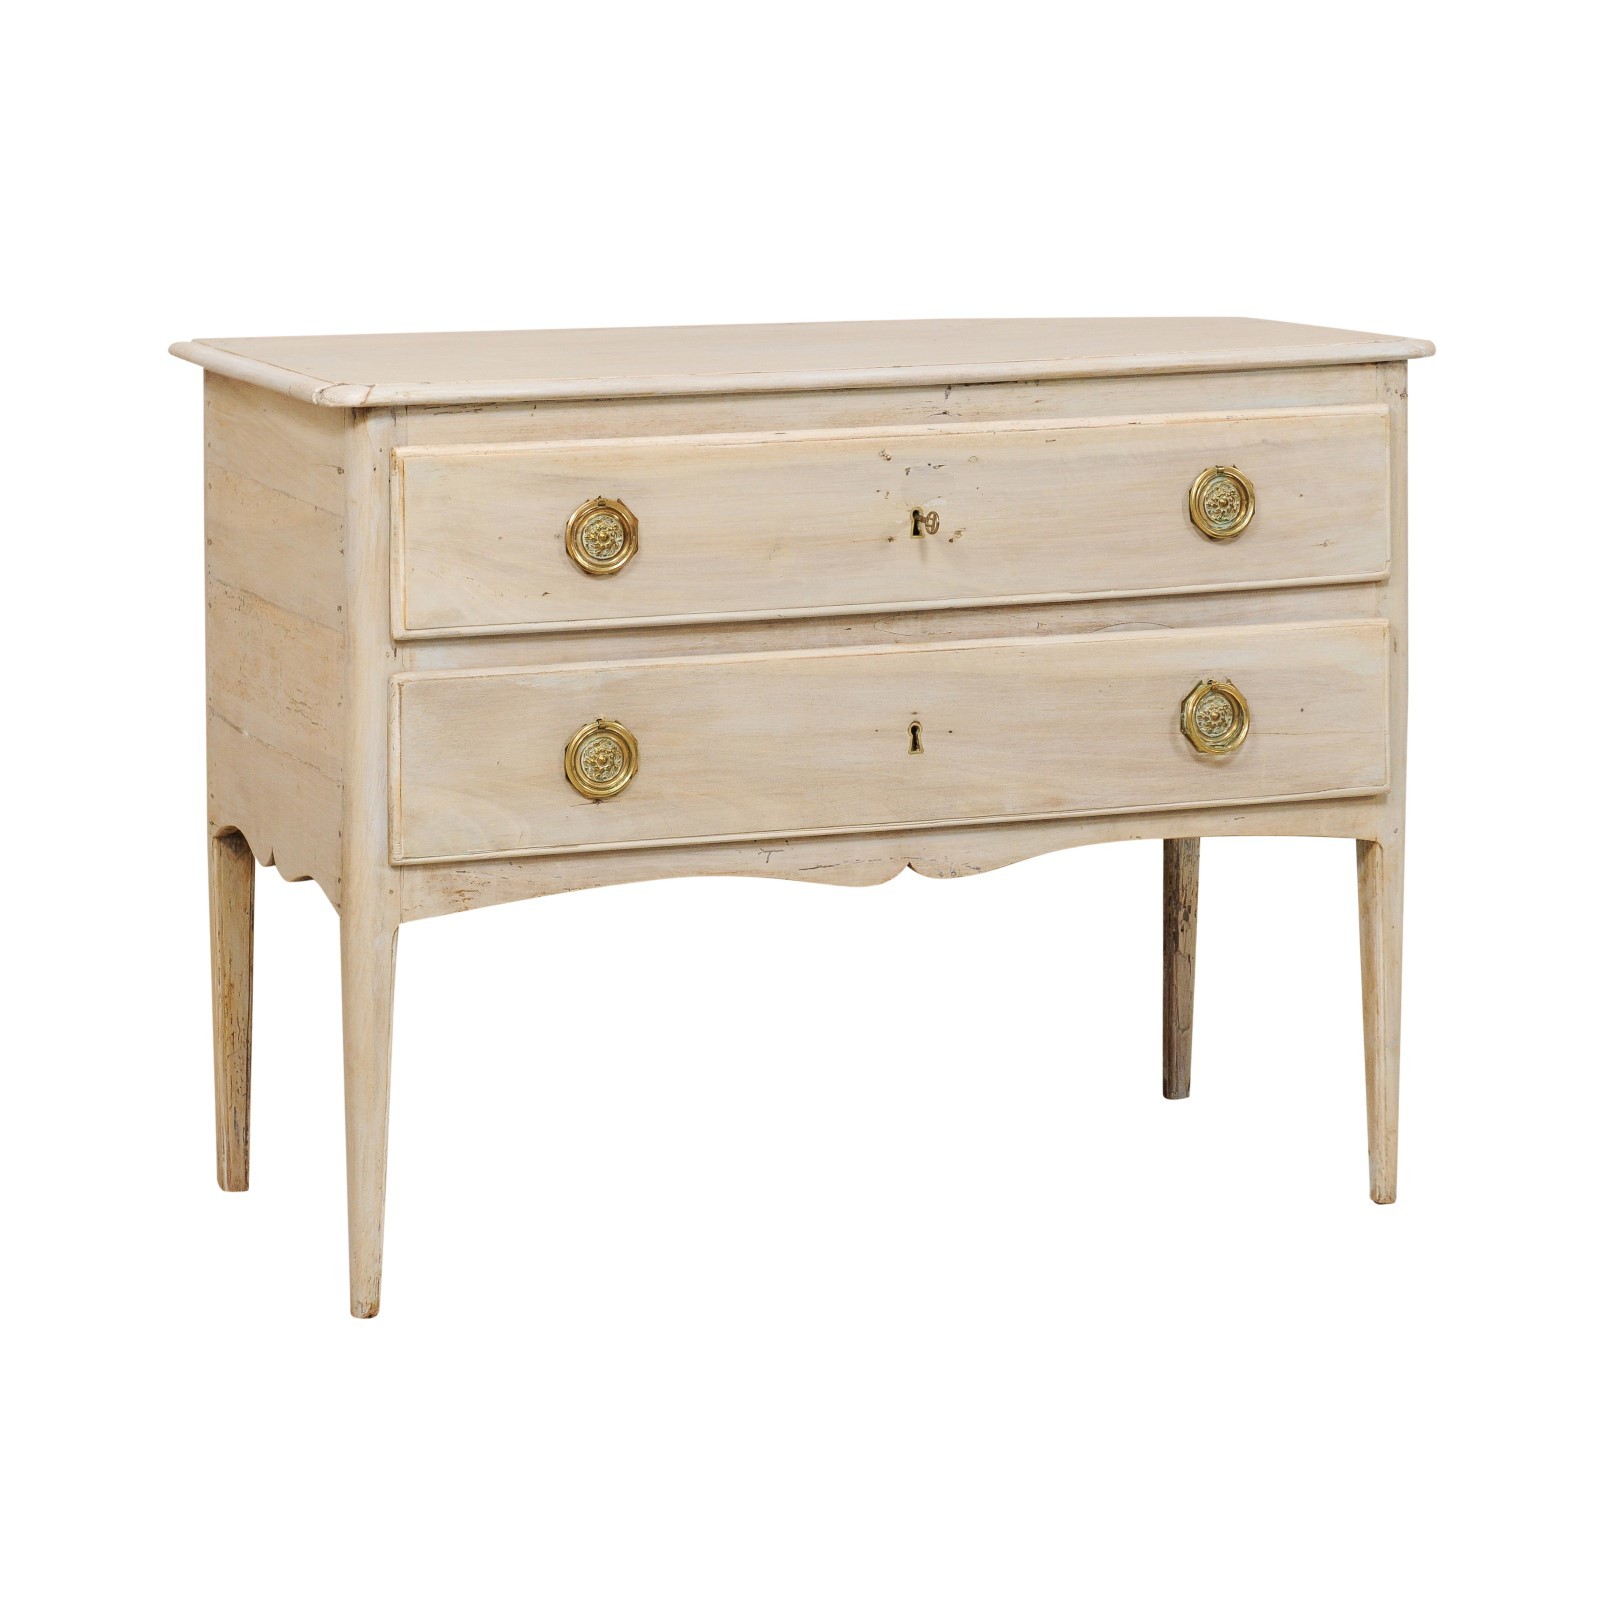 Early 19th C. Two-Drawer Commode